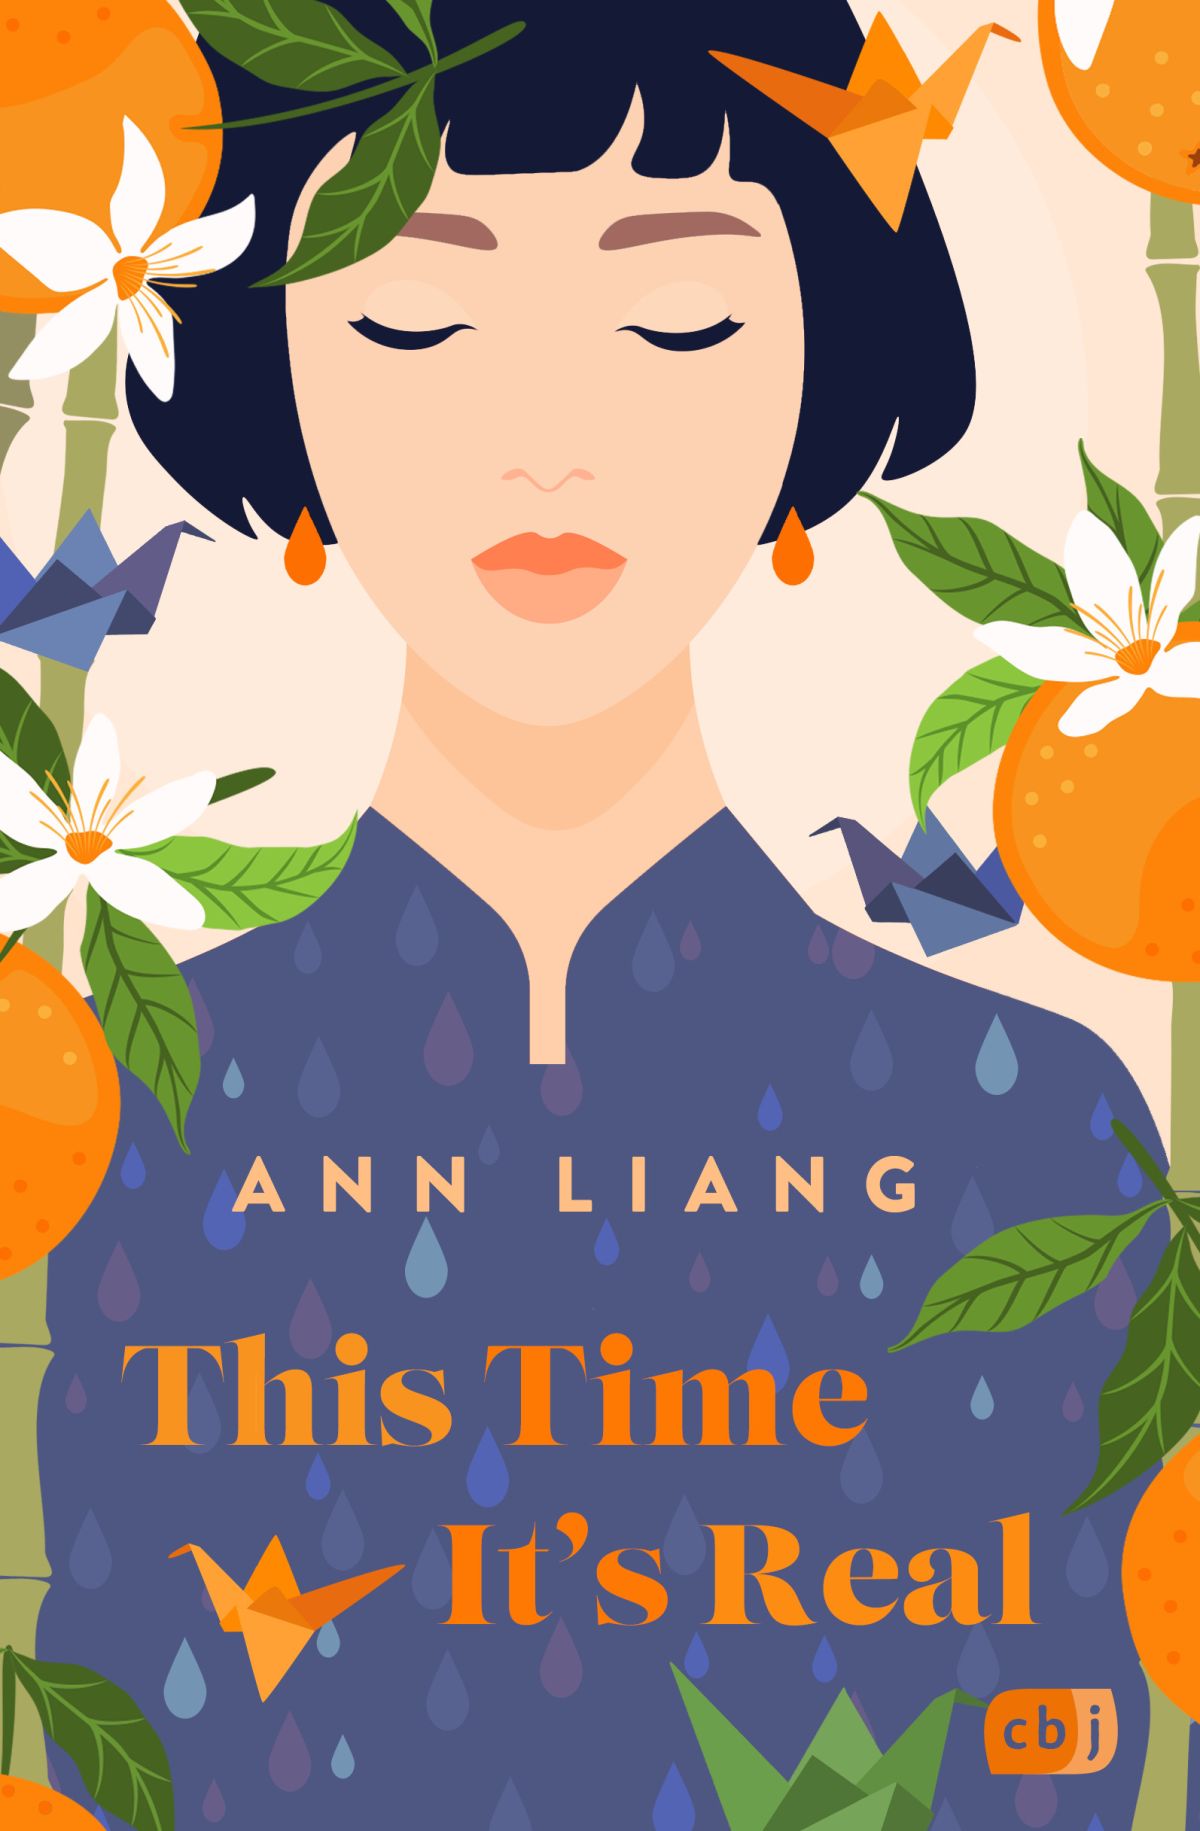 Ann Liang - This Time It’s Real